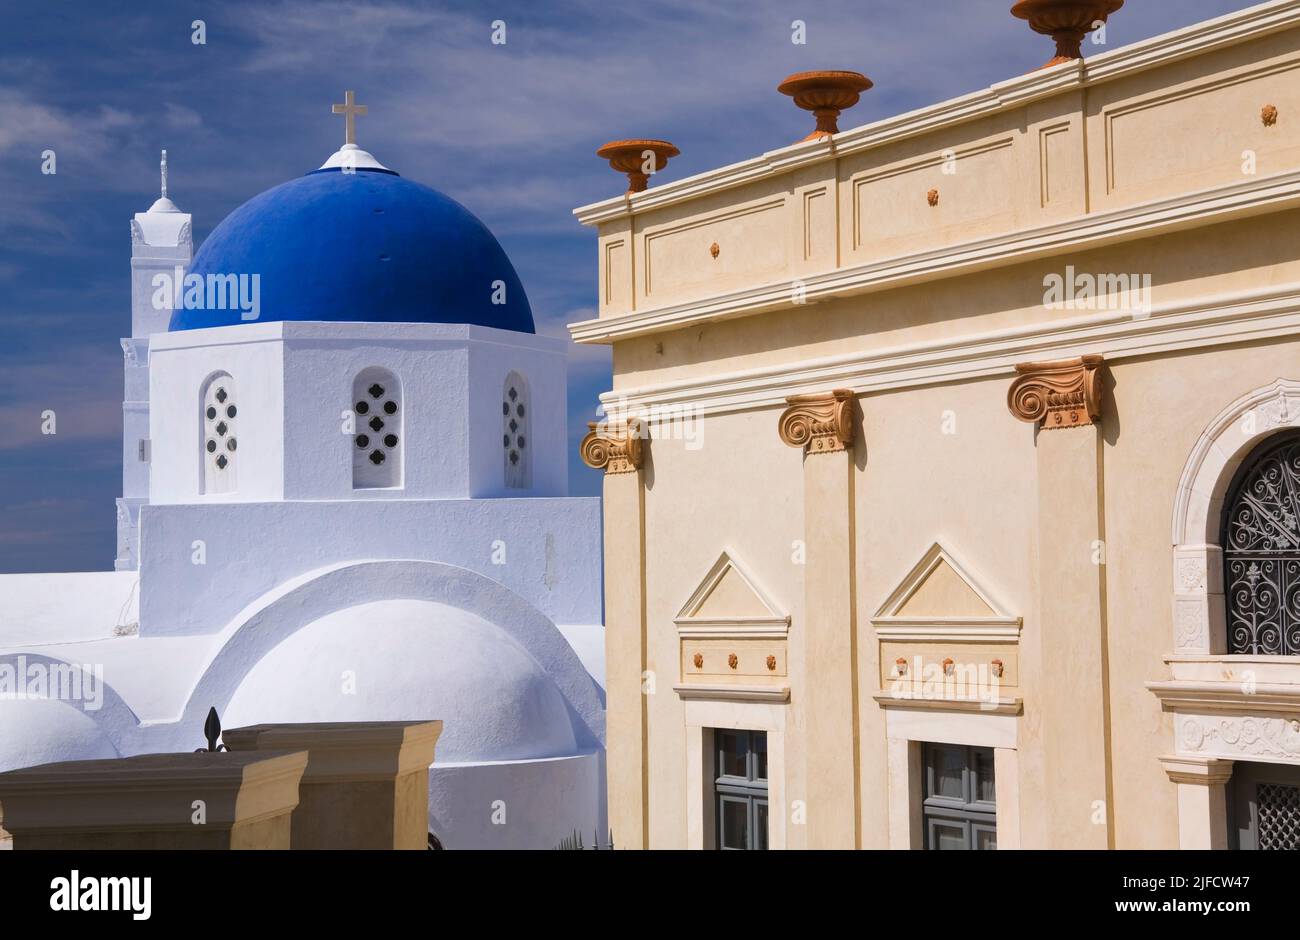 Restored old architectural hotel building and blue domed chapel, Pyrgos, Santorini, Greece. Stock Photo